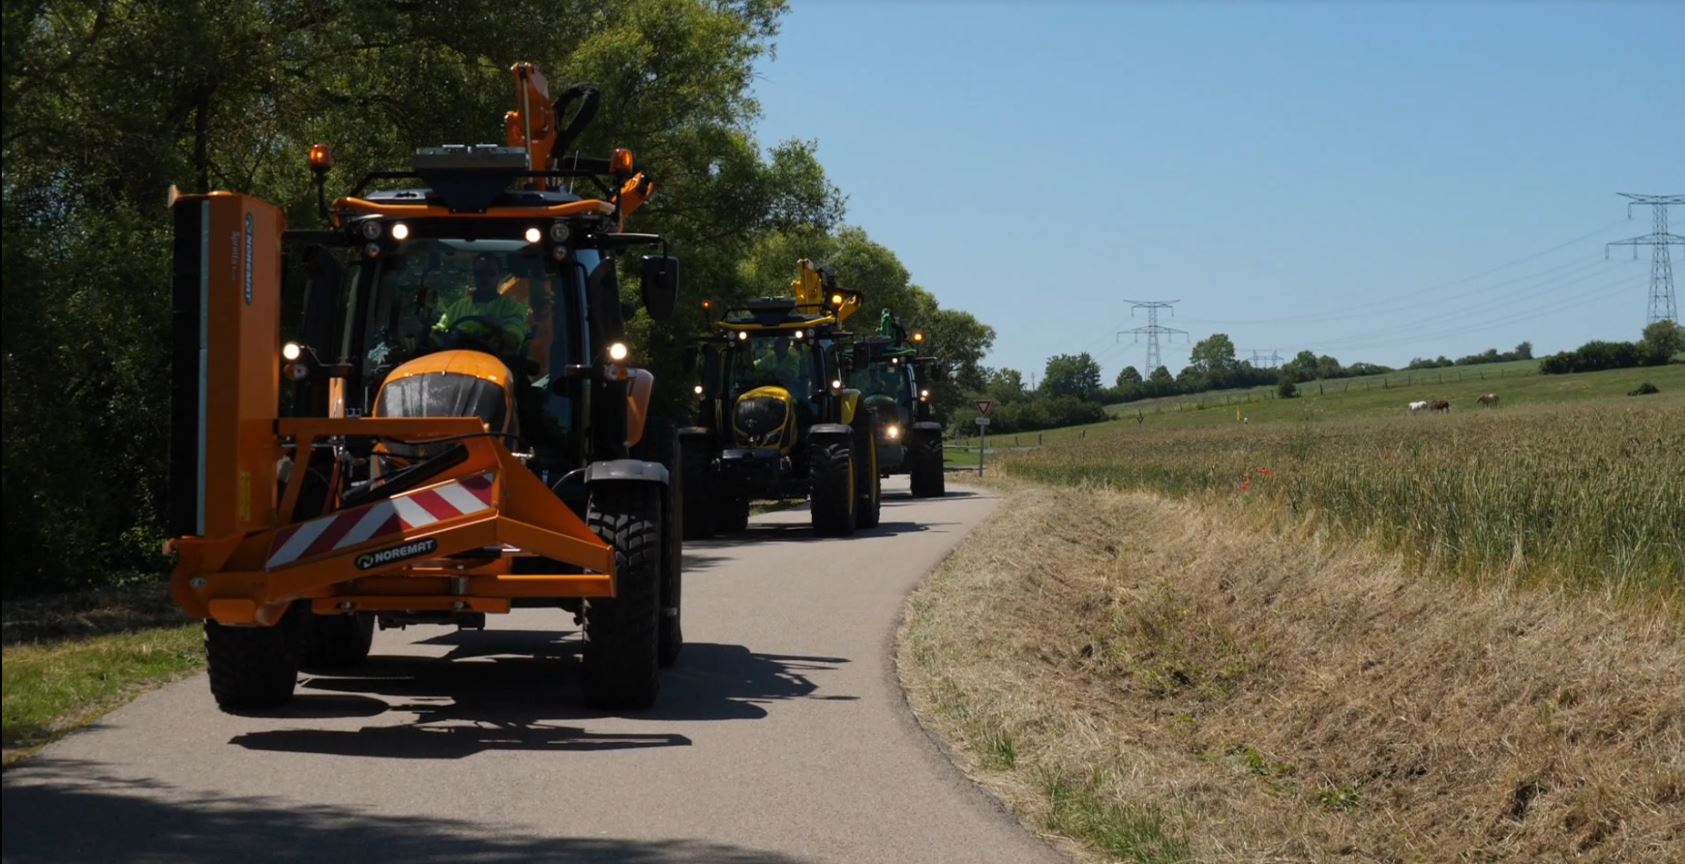 Valtra Unlimited tractors for municipalities: Noremat trio video